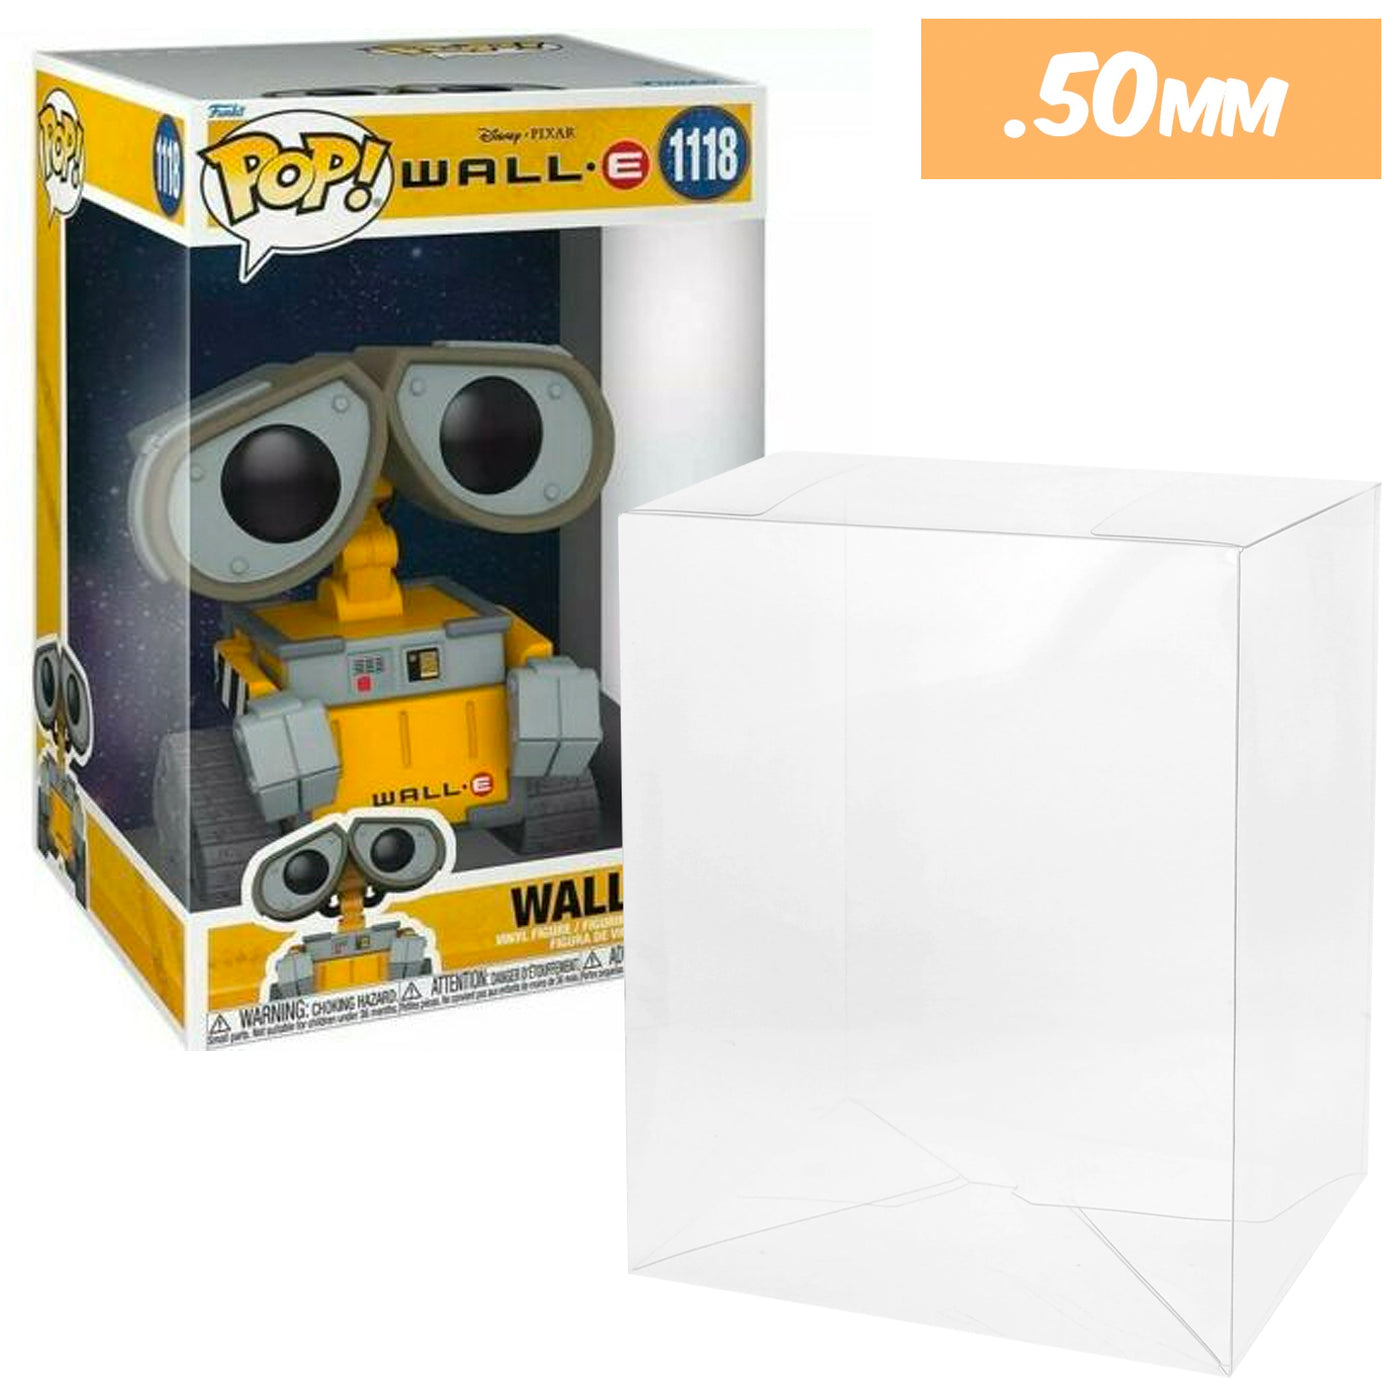 10 inch new size wall-e best funko pop protectors thick strong uv scratch flat top stack vinyl display geek plastic shield vaulted eco armor fits collect protect display case kollector protector